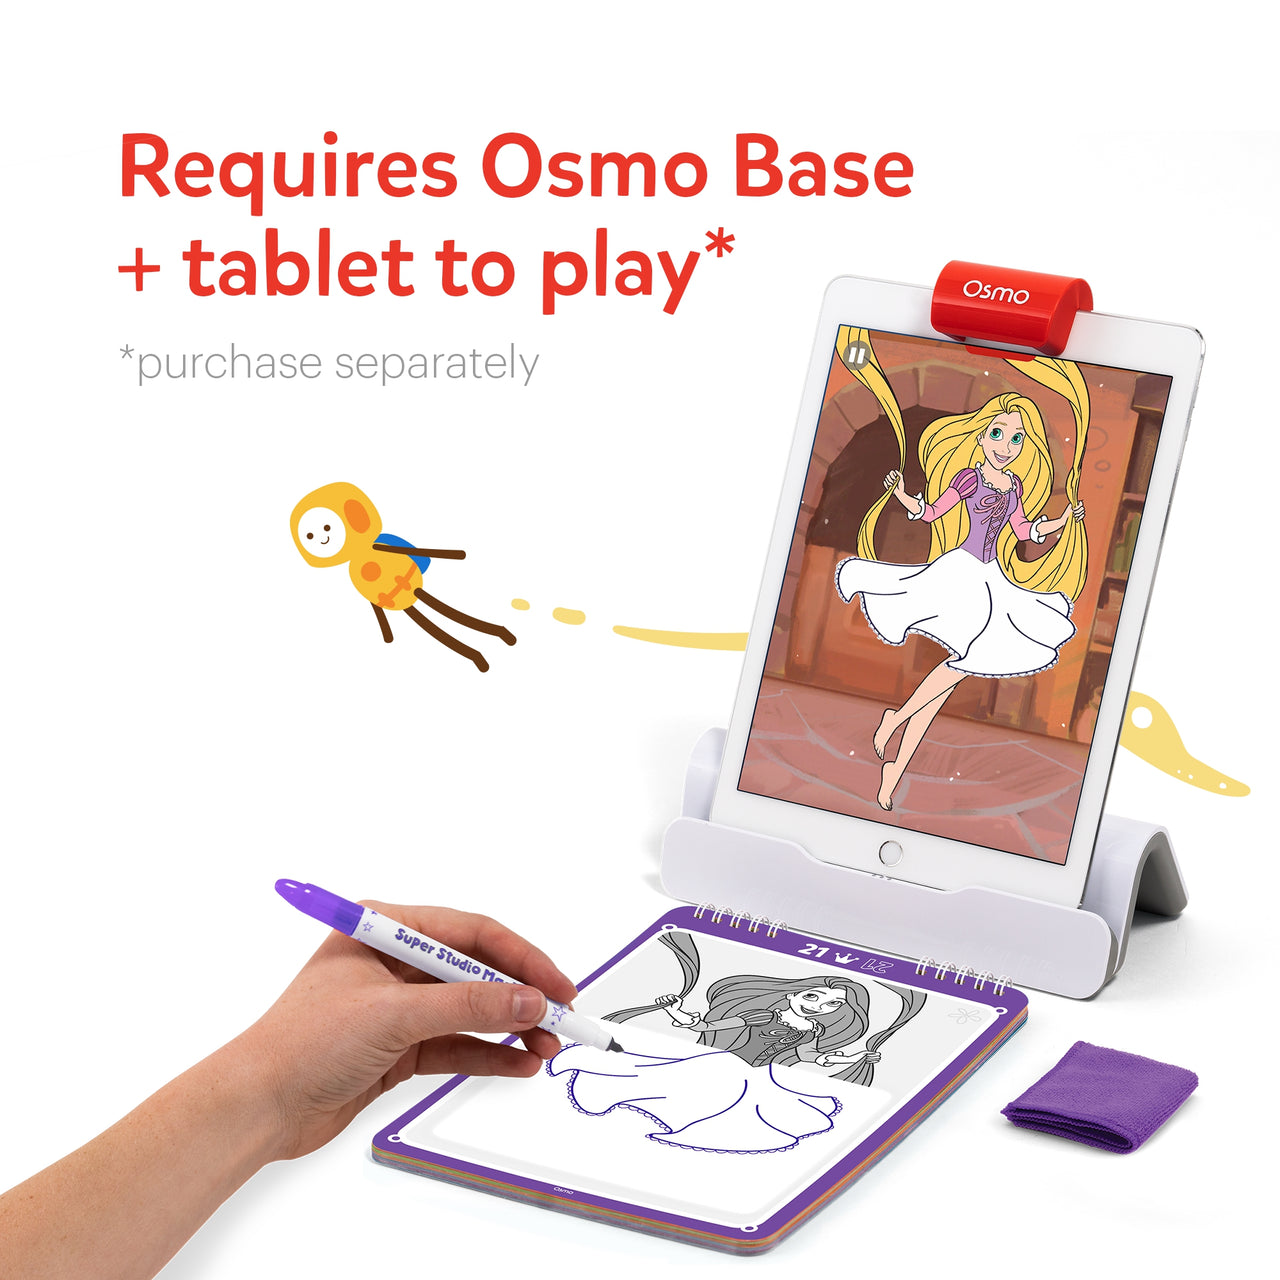 Osmo Super Studio Disney Princess Starter Kit for iPad for Ages 5-11 (Osmo Base included)